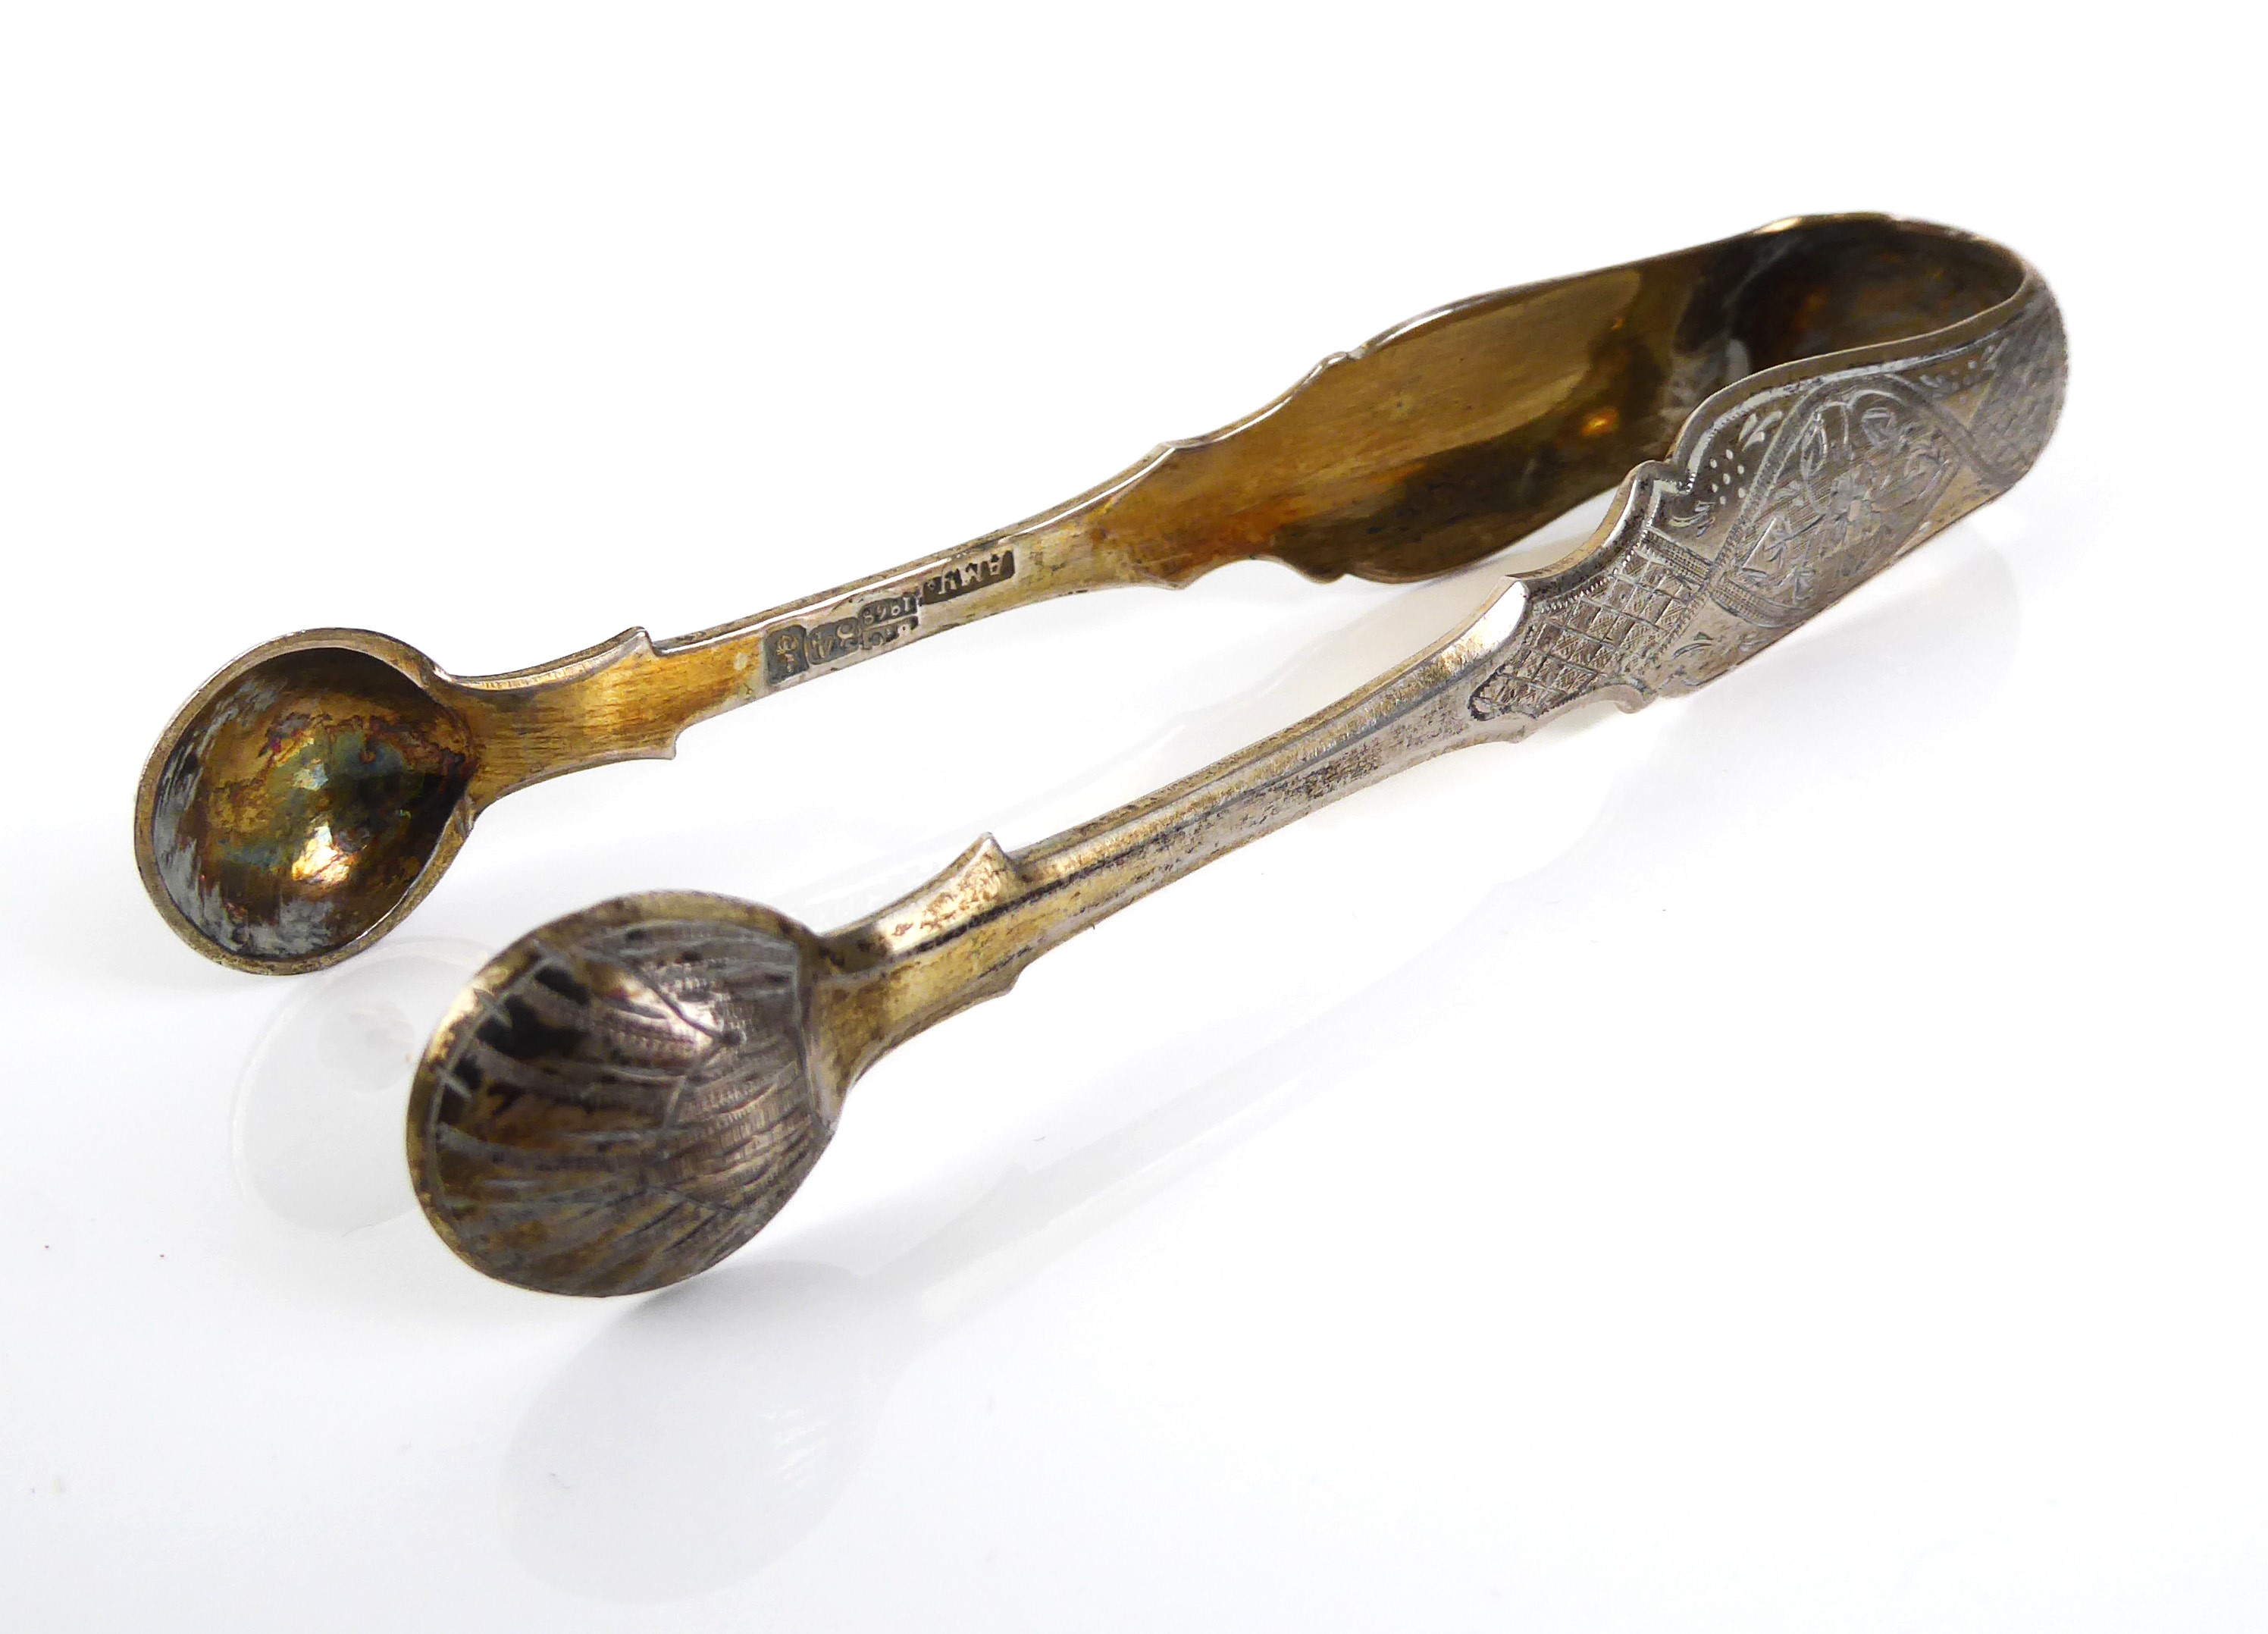 A pair of Russian silver-gilt sugar tongs - assayer Viktor Savinkov, Moscow 1868, with shell bowls - Image 5 of 6